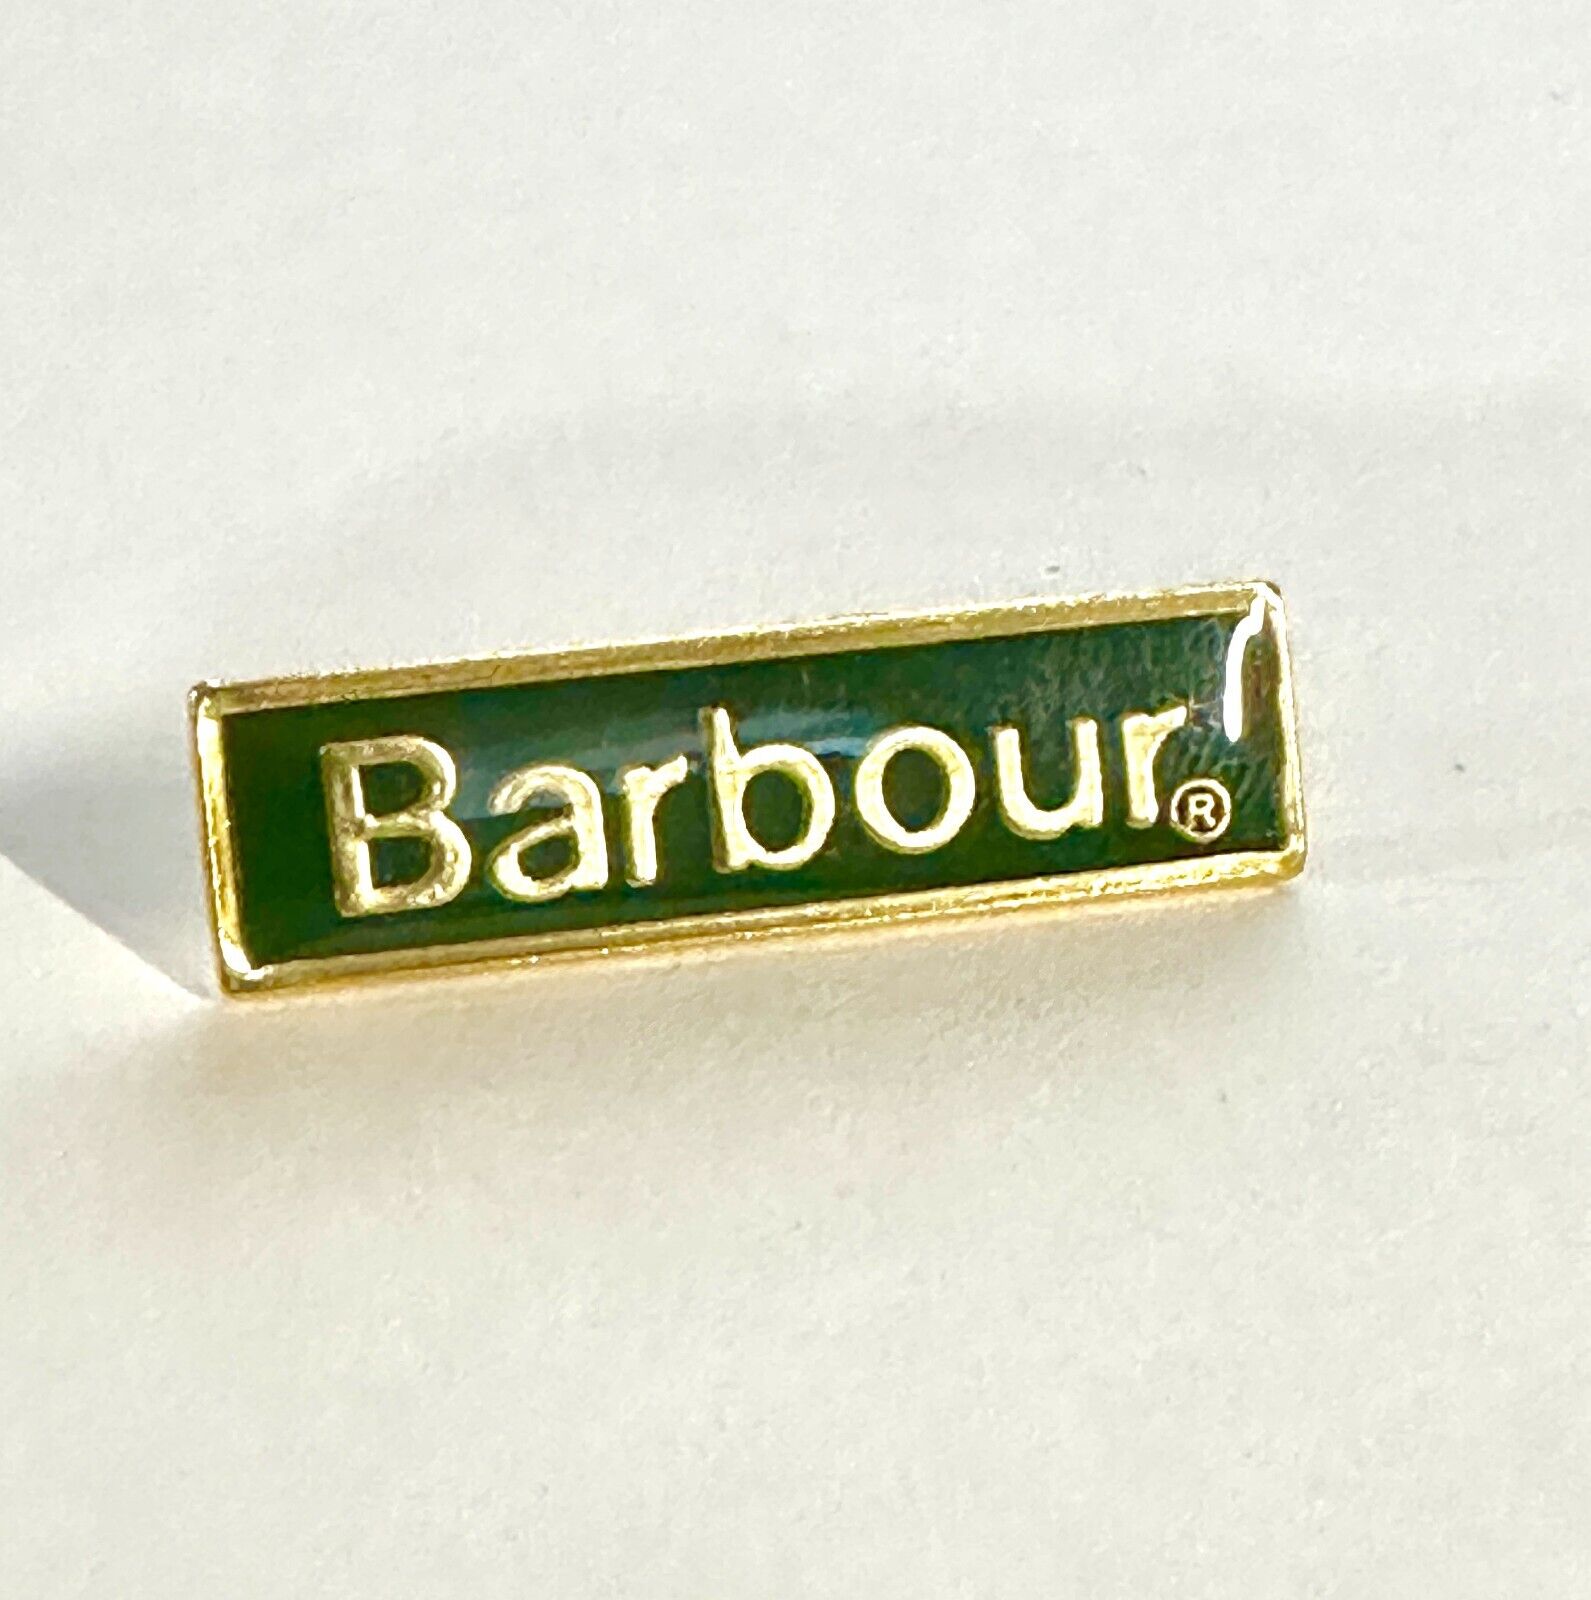 BARBOUR Official Genuine Green and Gold Vintage ENAMEL LAPEL PIN BADGE New